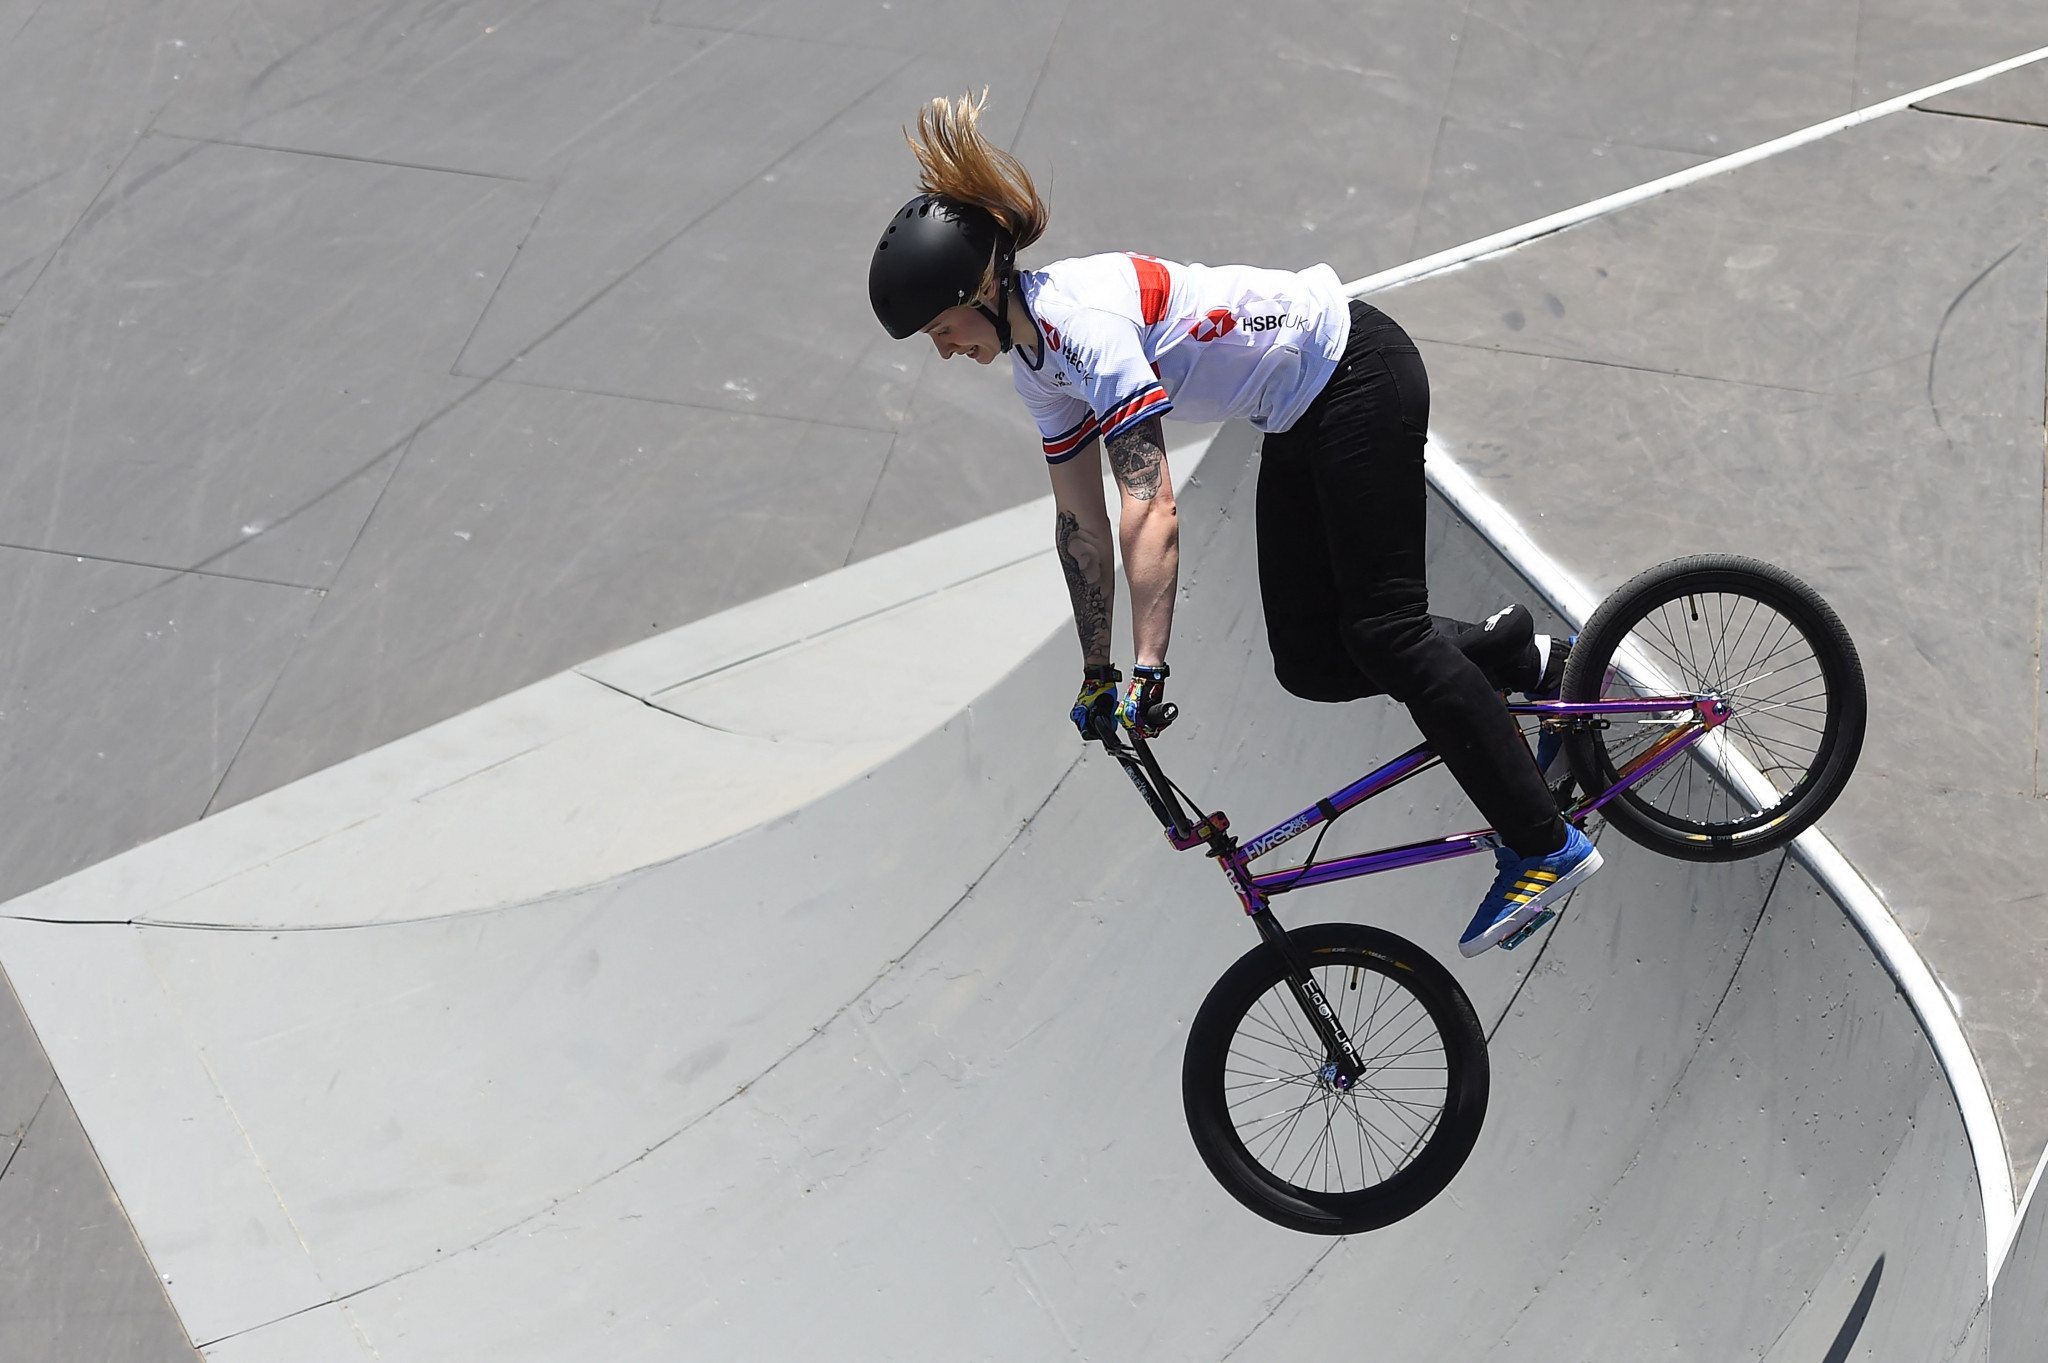 British BMX star Charlotte Worthington says she is looking forward to seeing some creative entries ©Getty Images